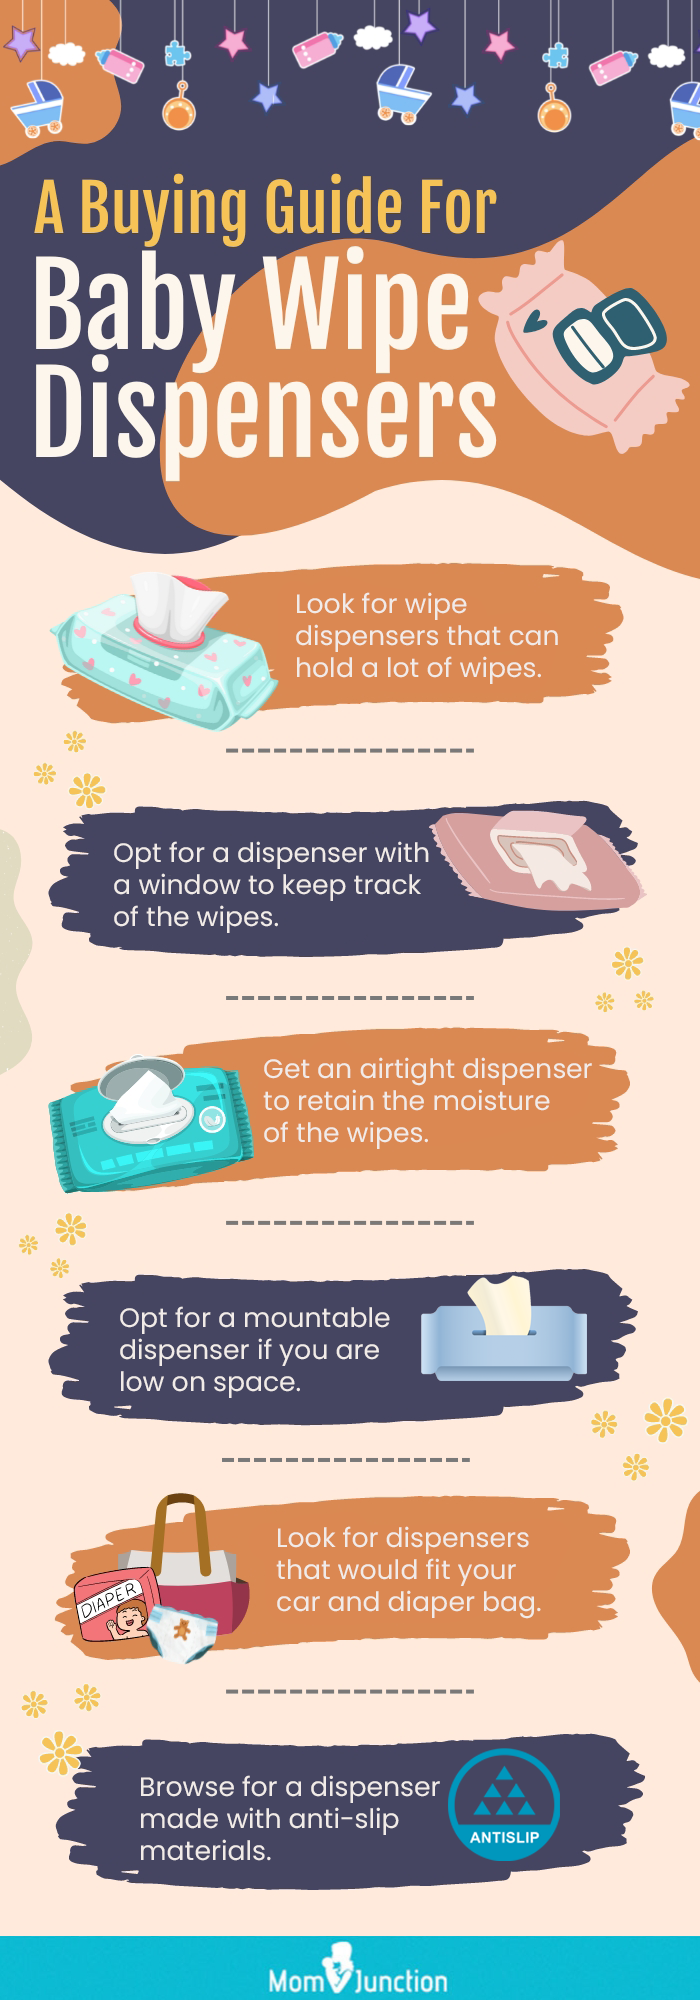 A Buying Guide For Baby Wipe Dispensers (infographic)